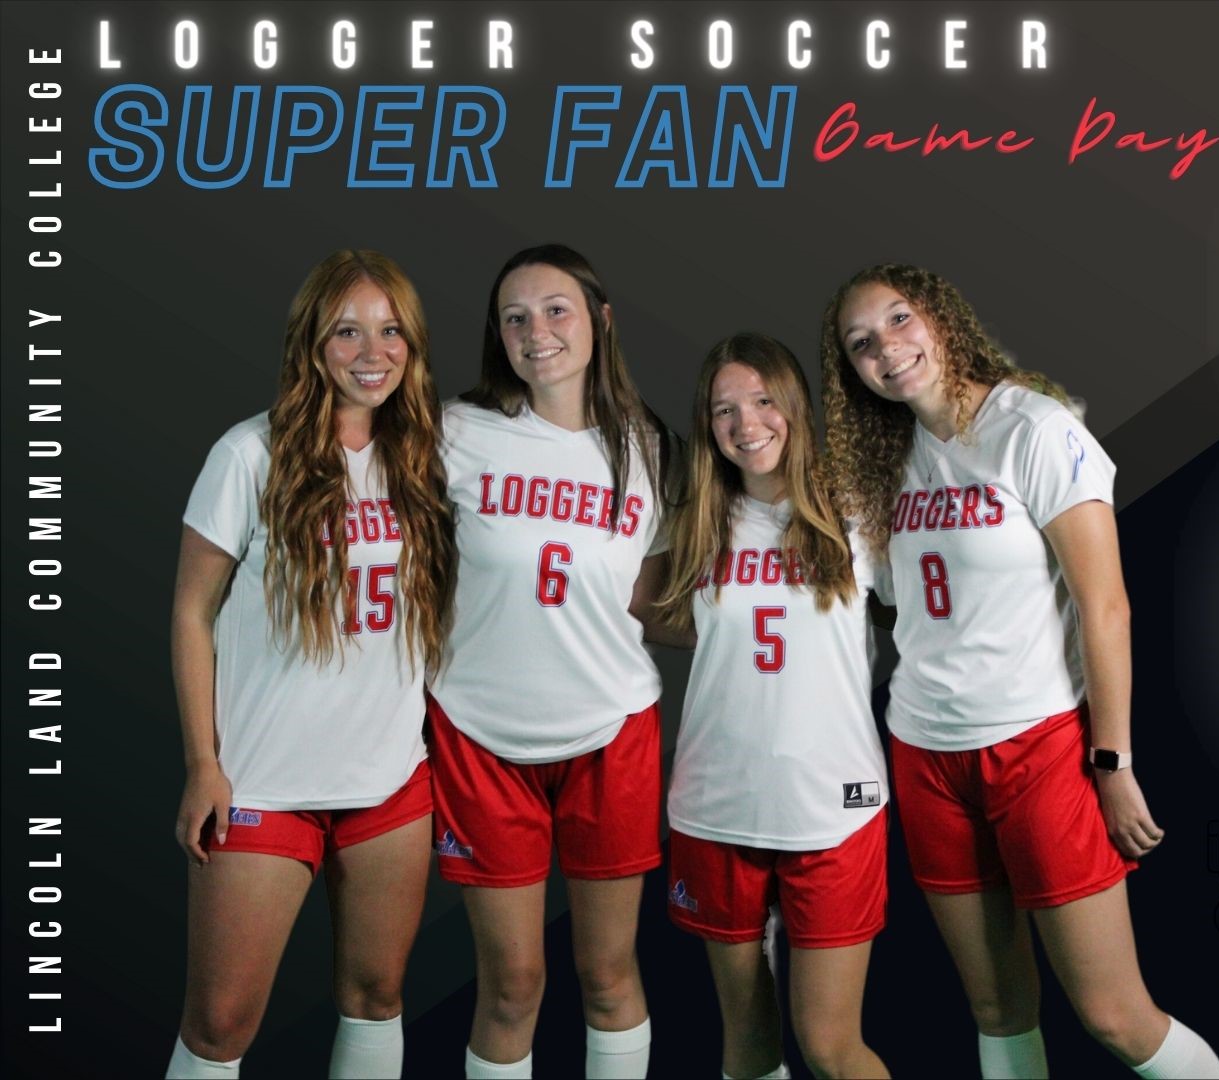 Lincoln Land Community College. Logger Soccer. Super Fan Game. Photo of four soccer players